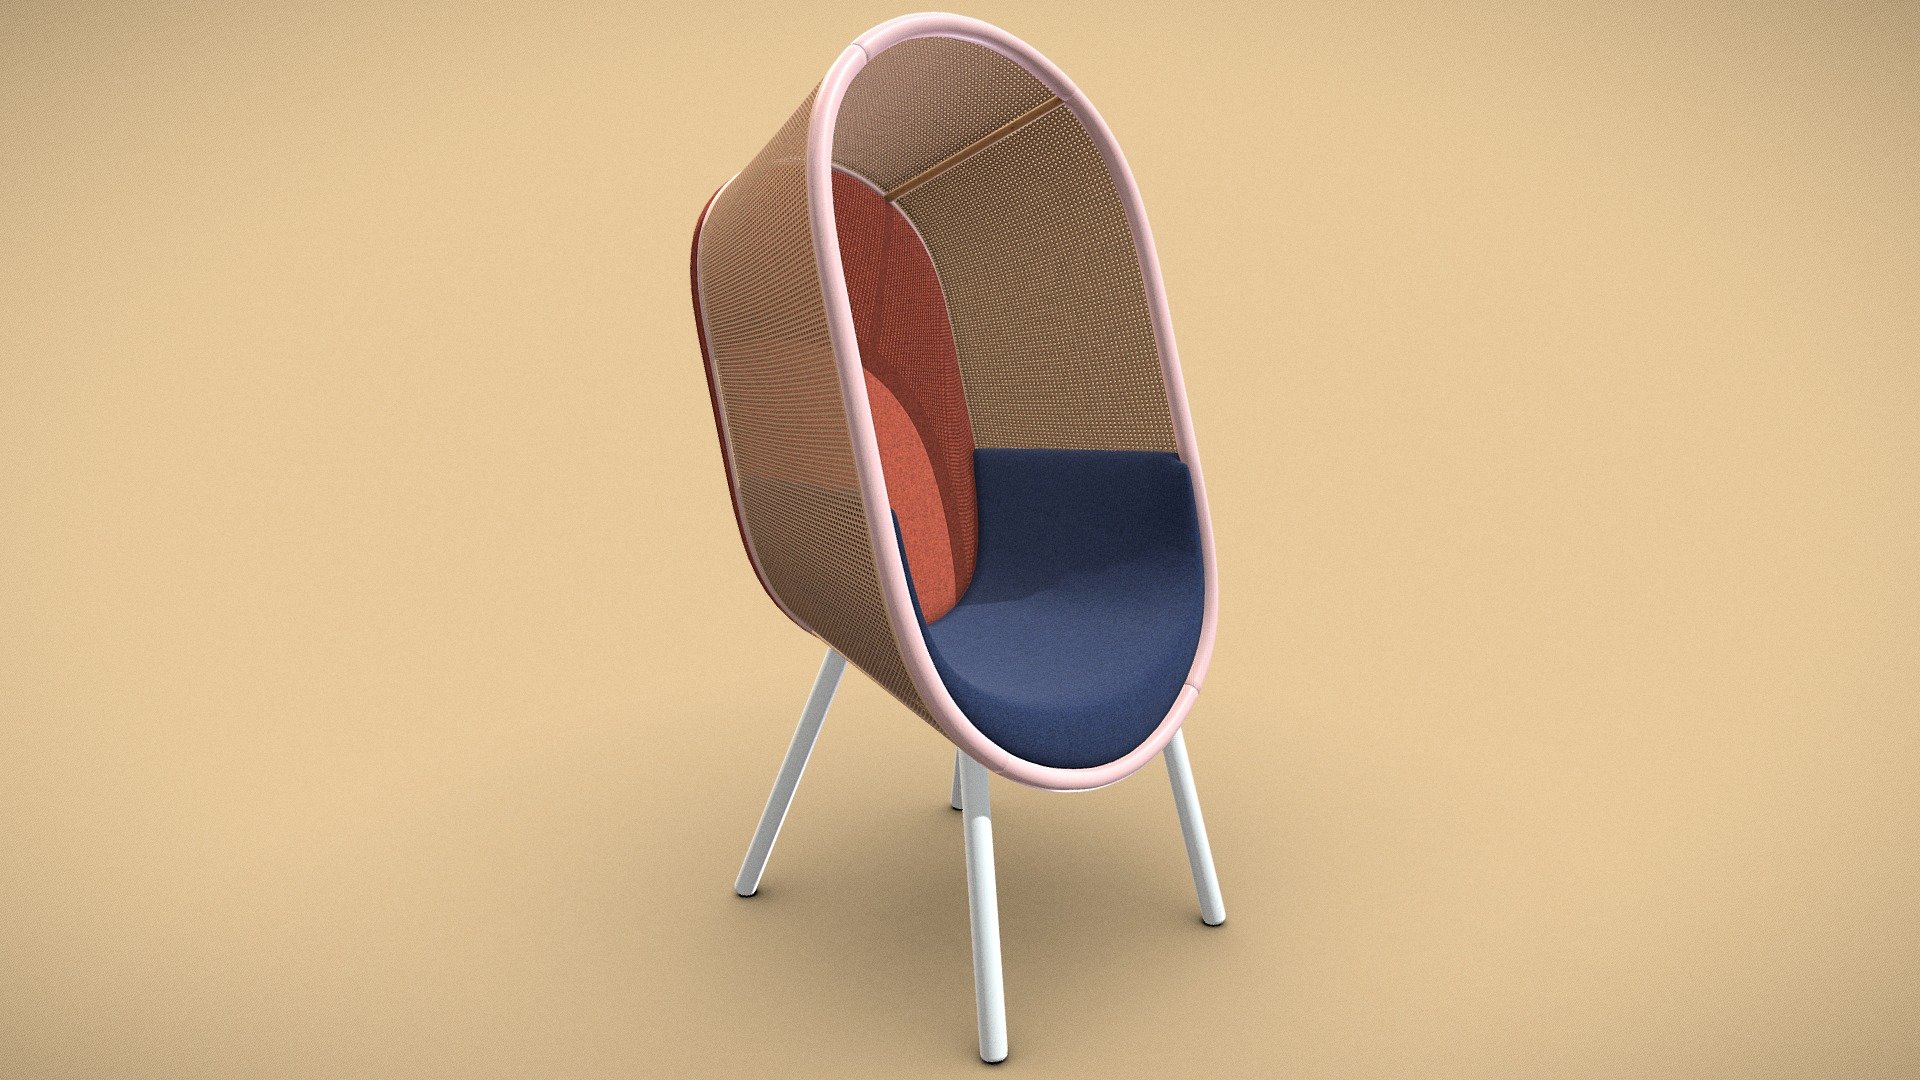 The Cocoon Lounge Chair designed by Danish architect Kevin Hviid and Danish designer Martin Kechayas is available in modern and natural colors and is sold together with atbo. With a combination of vienna straw and timeless design of the 60s, it fits into any interior.

HERE is also a natural version from my profile.

Modeled and textured with Blender 3D.

Scale: 0.64 m * 0.74 m * 1.3 m

About the License:

Copyright to atbo: https://atbo.com/products/cocoon-lounge-chair

“One or more textures on this 3D model have been created with photographs from Textures.com. These photographs may not be redistributed by default; please visit www.textures.com for more information.” - COCOON Lounge Chair by Kevin Hviid - Colorful - Buy Royalty Free 3D model by Pascal Garten (@pascalgarten) 3d model